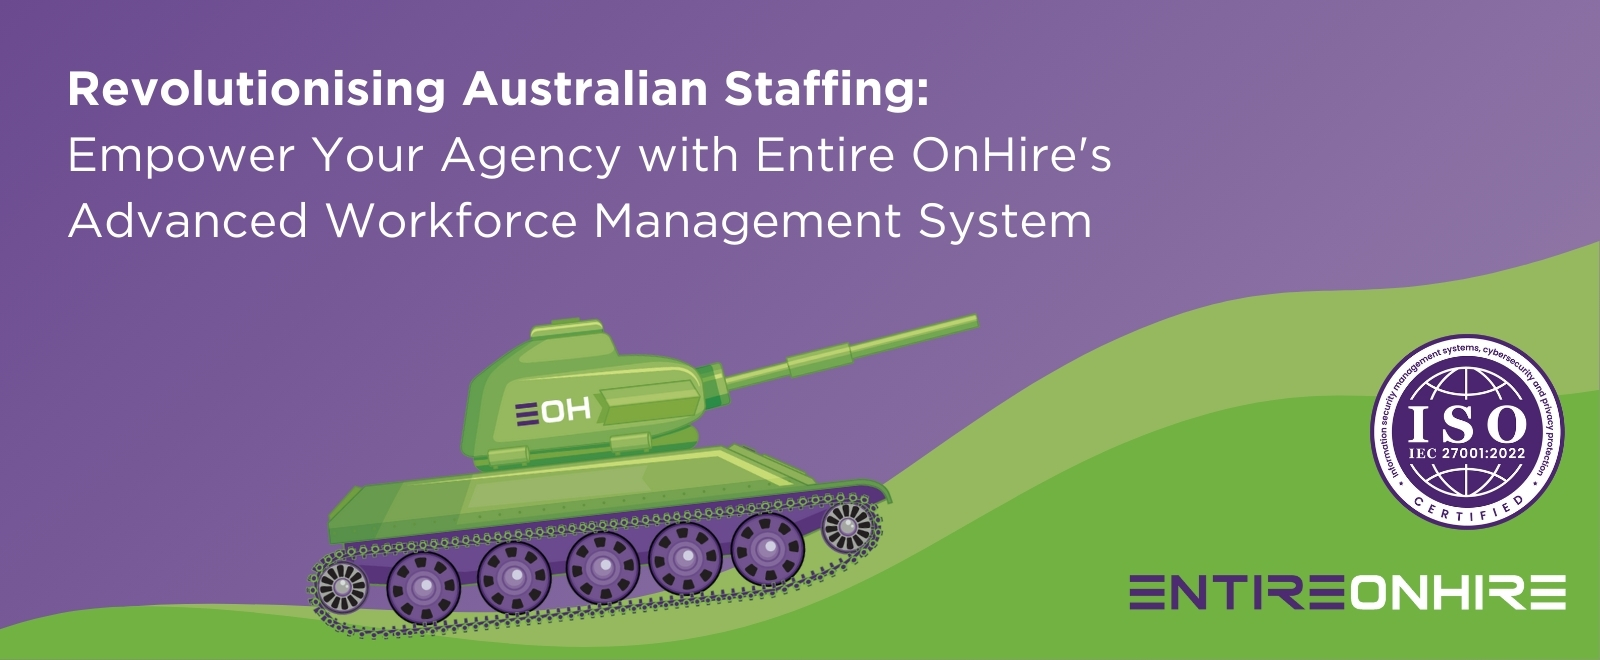 How Entire OnHire is Empowering Temp Agencies with the Most Specialised Workforce Management System in Australia